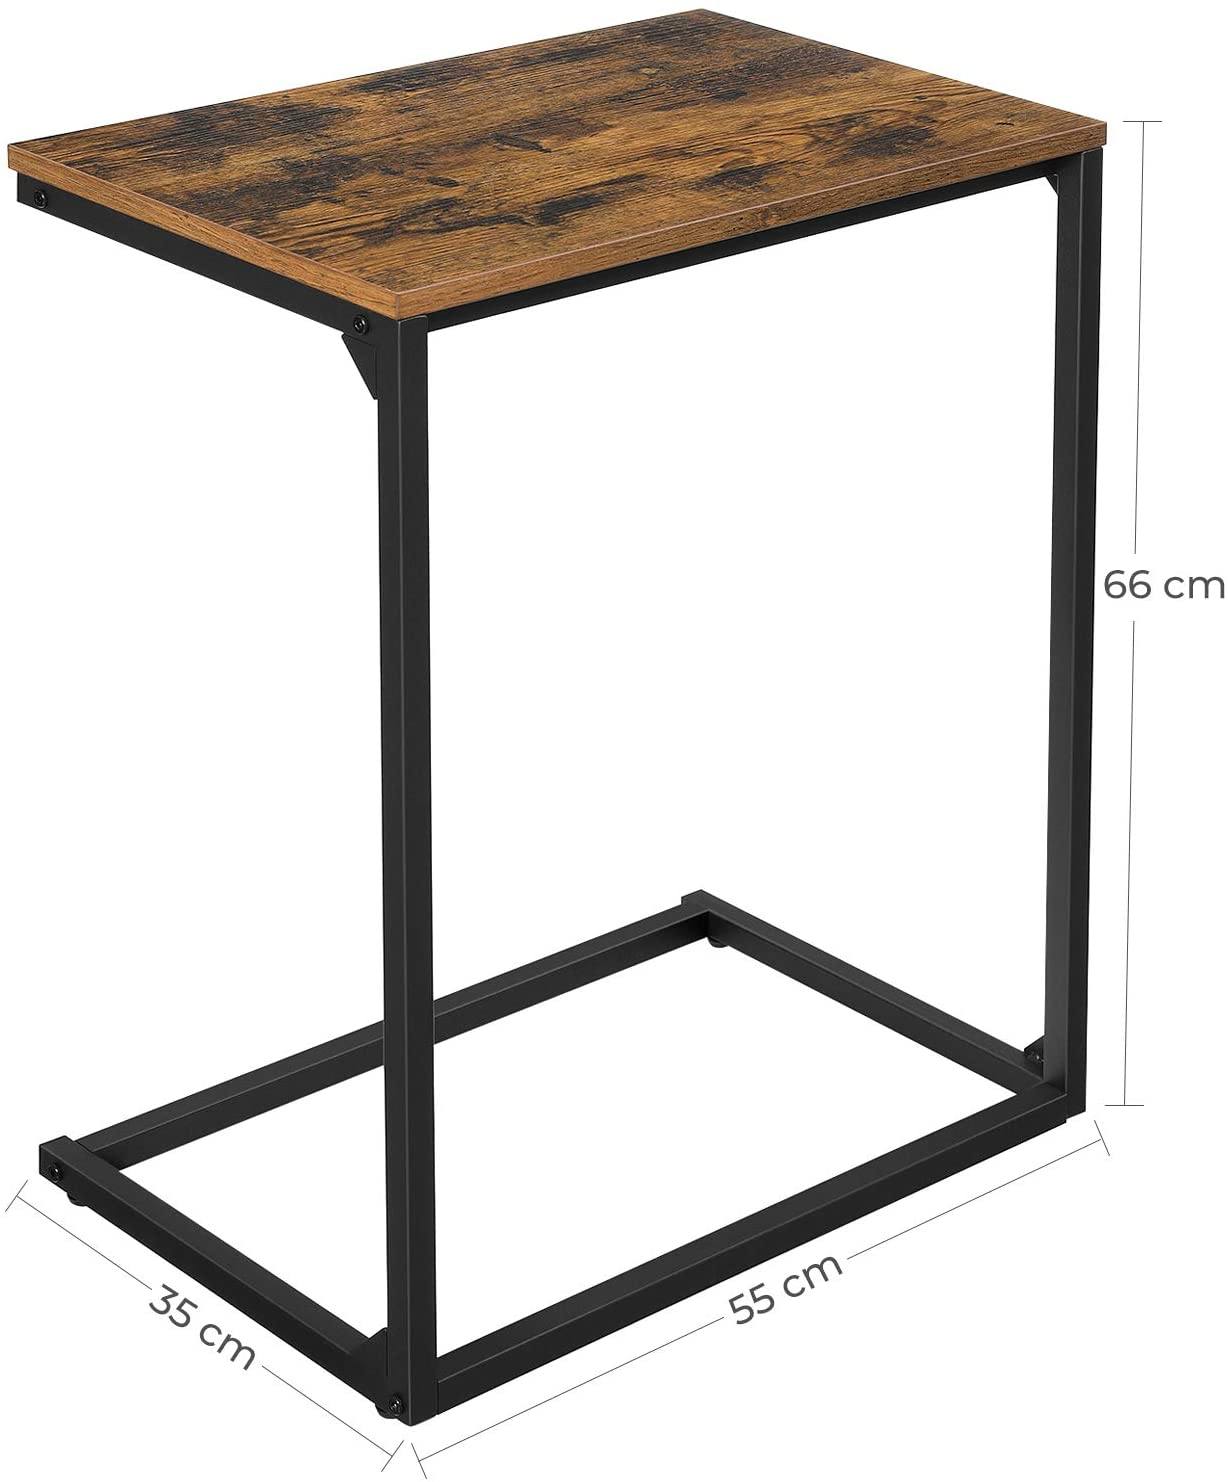 Side Table, Small Sofa Table, End Table, Laptop Table, for Bedroom, Living Room, Work in Bed or on The Sofa, Simple Structure, Stable, Industrial Style, Rustic Brown and Black LNT52BX RAW58.dk 